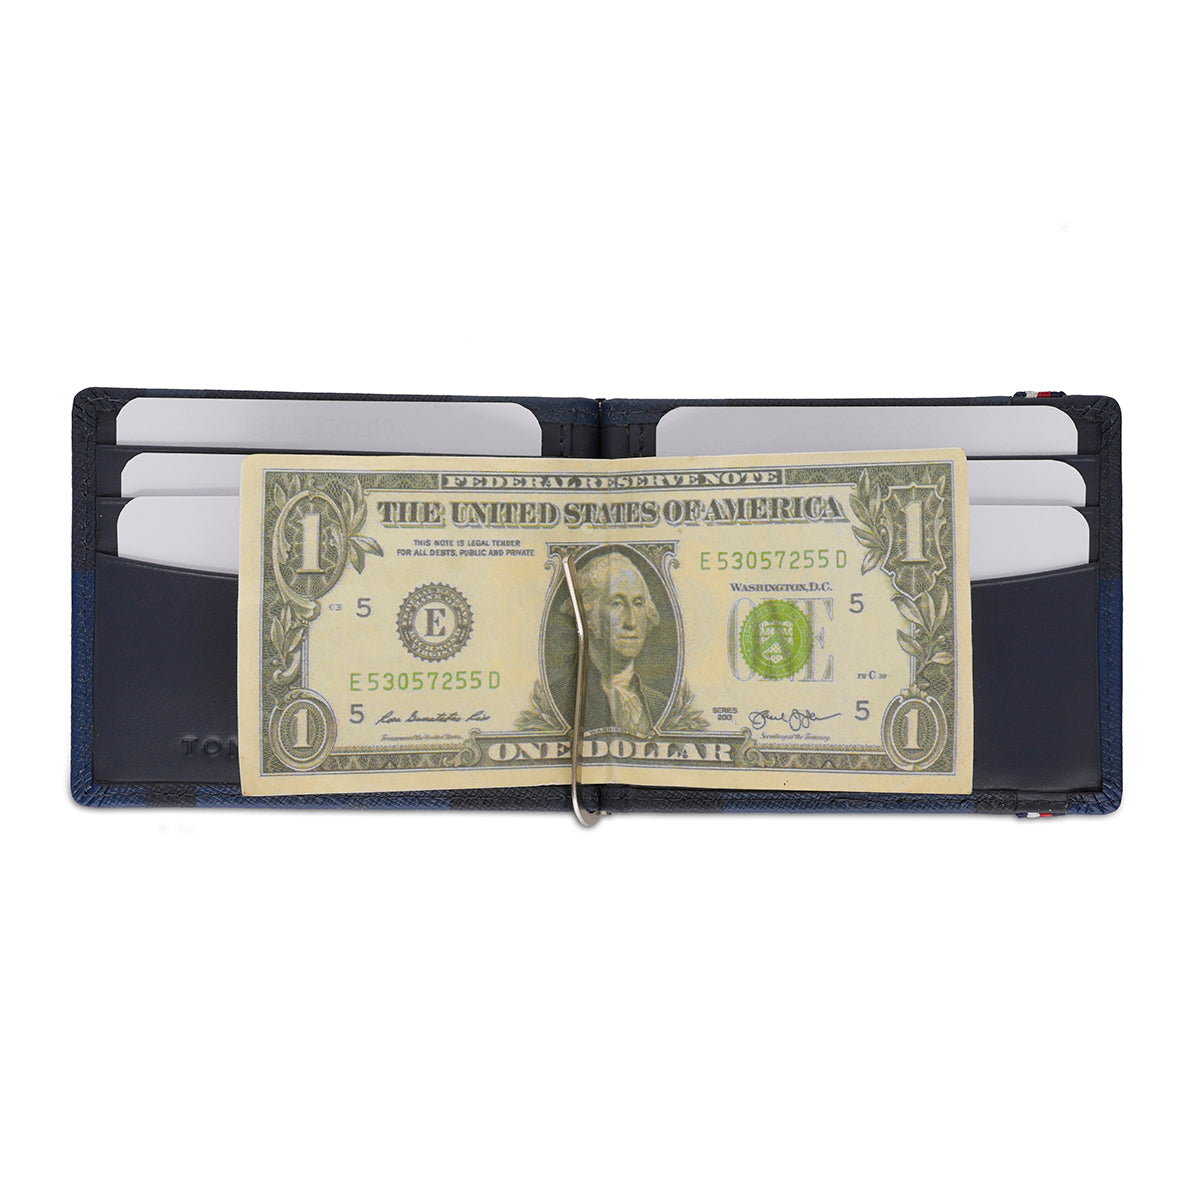 Tommy Hilfiger Small Leather Goods Newburg Money Clip Navy